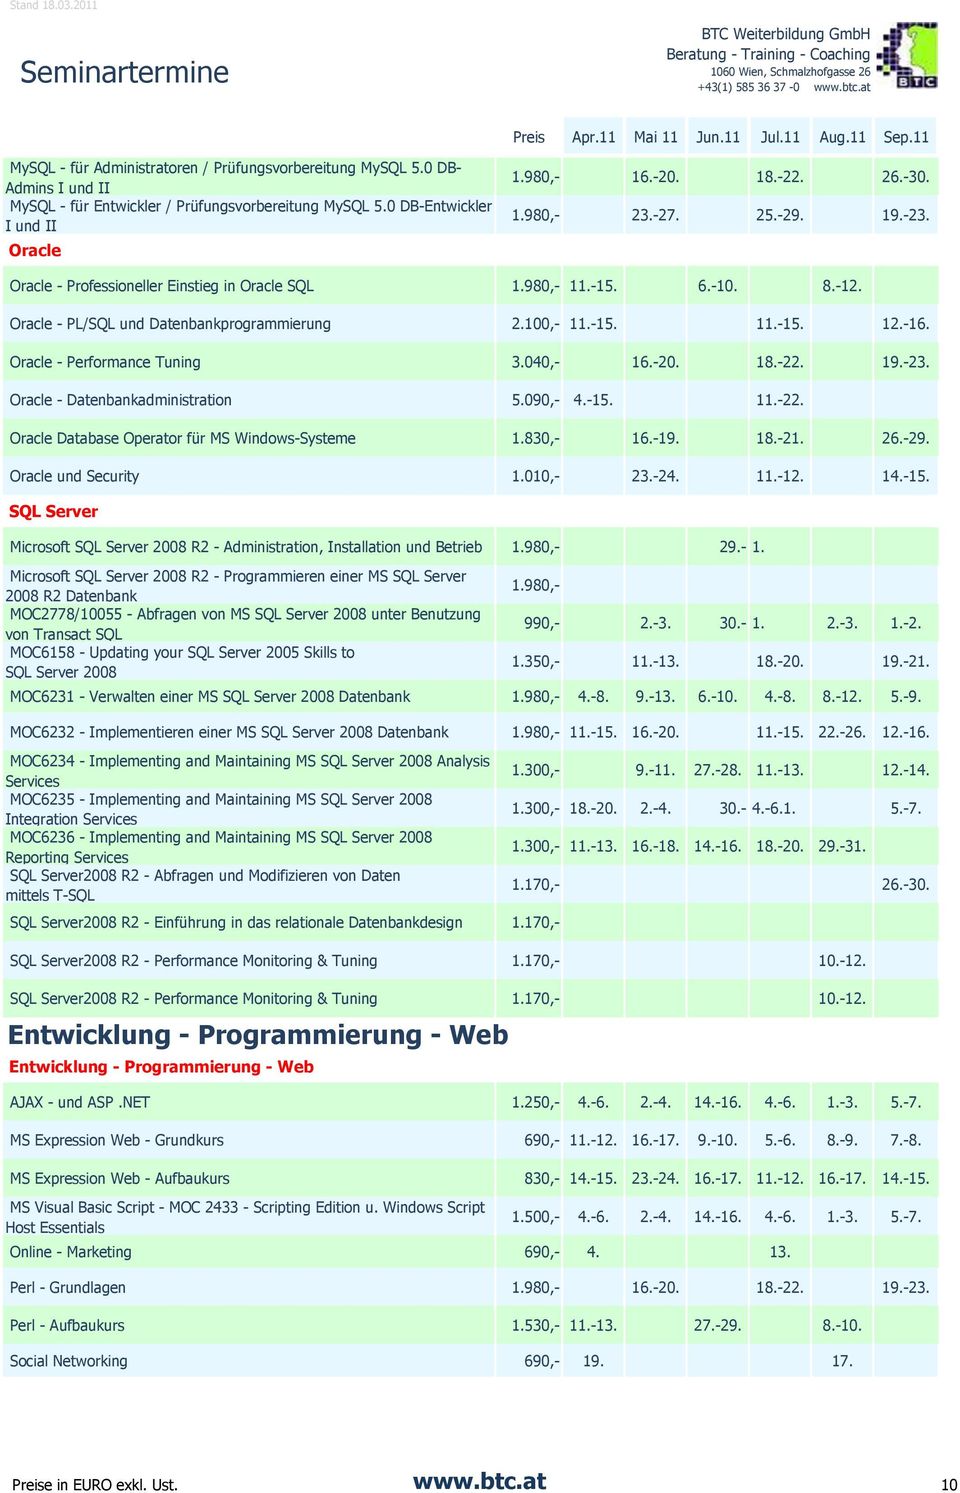 Oracle - Performance Tuning 3.040,- 16.-20. 18.-22. 19.-23. Oracle - Datenbankadministration 5.090,- 4.-15. 11.-22. Oracle Database Operator für MS Windows-Systeme 1.830,- 16.-19. 18.-21. 26.-29.